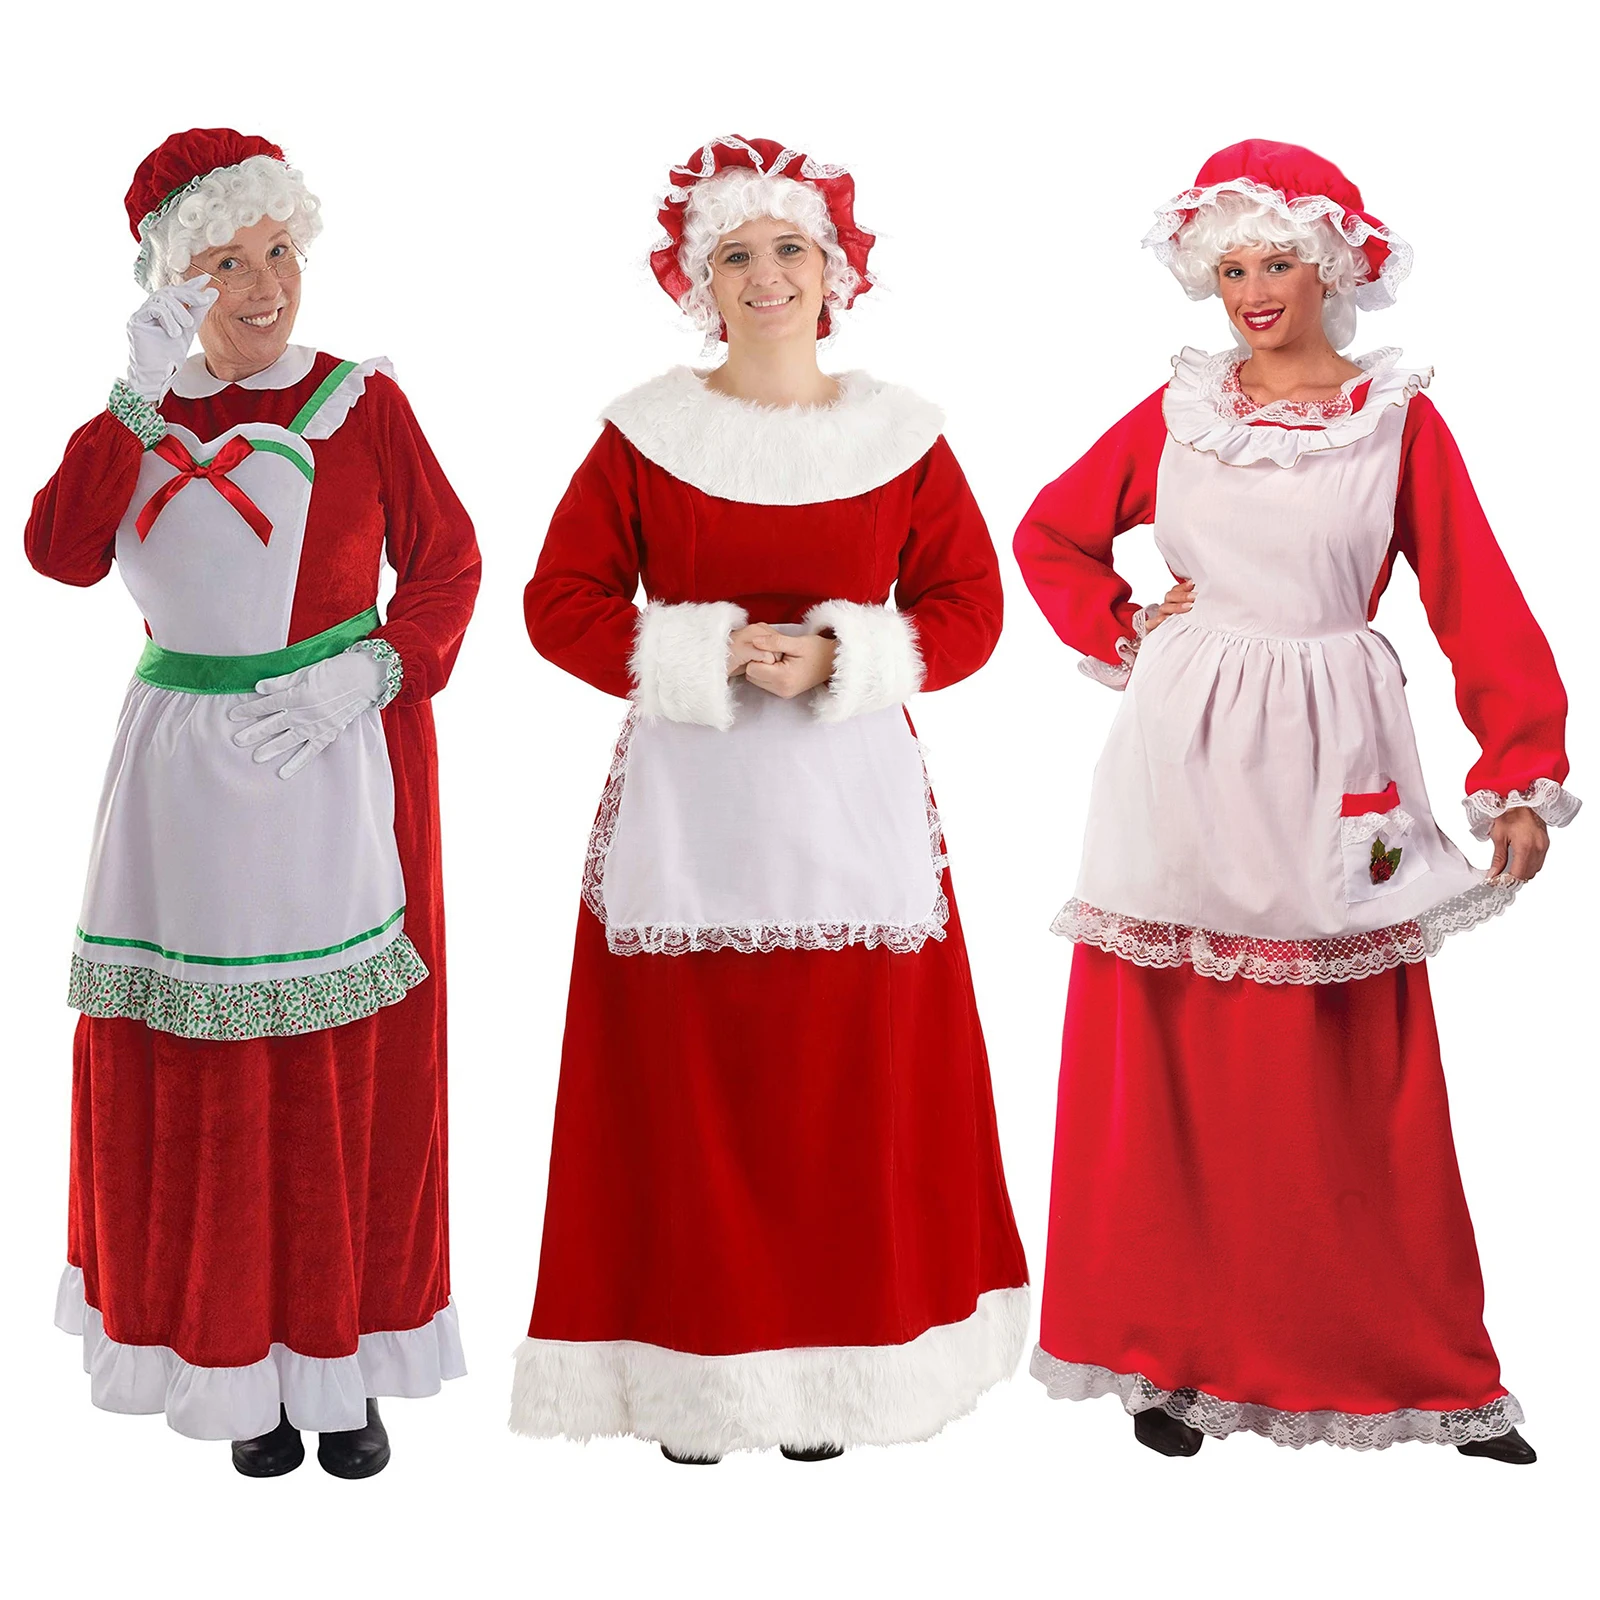 Christmas Women Cosplay Costume Set Maid Granny Long Sleeves Dress with Hat Apron for Christmas Halloween Role-playing